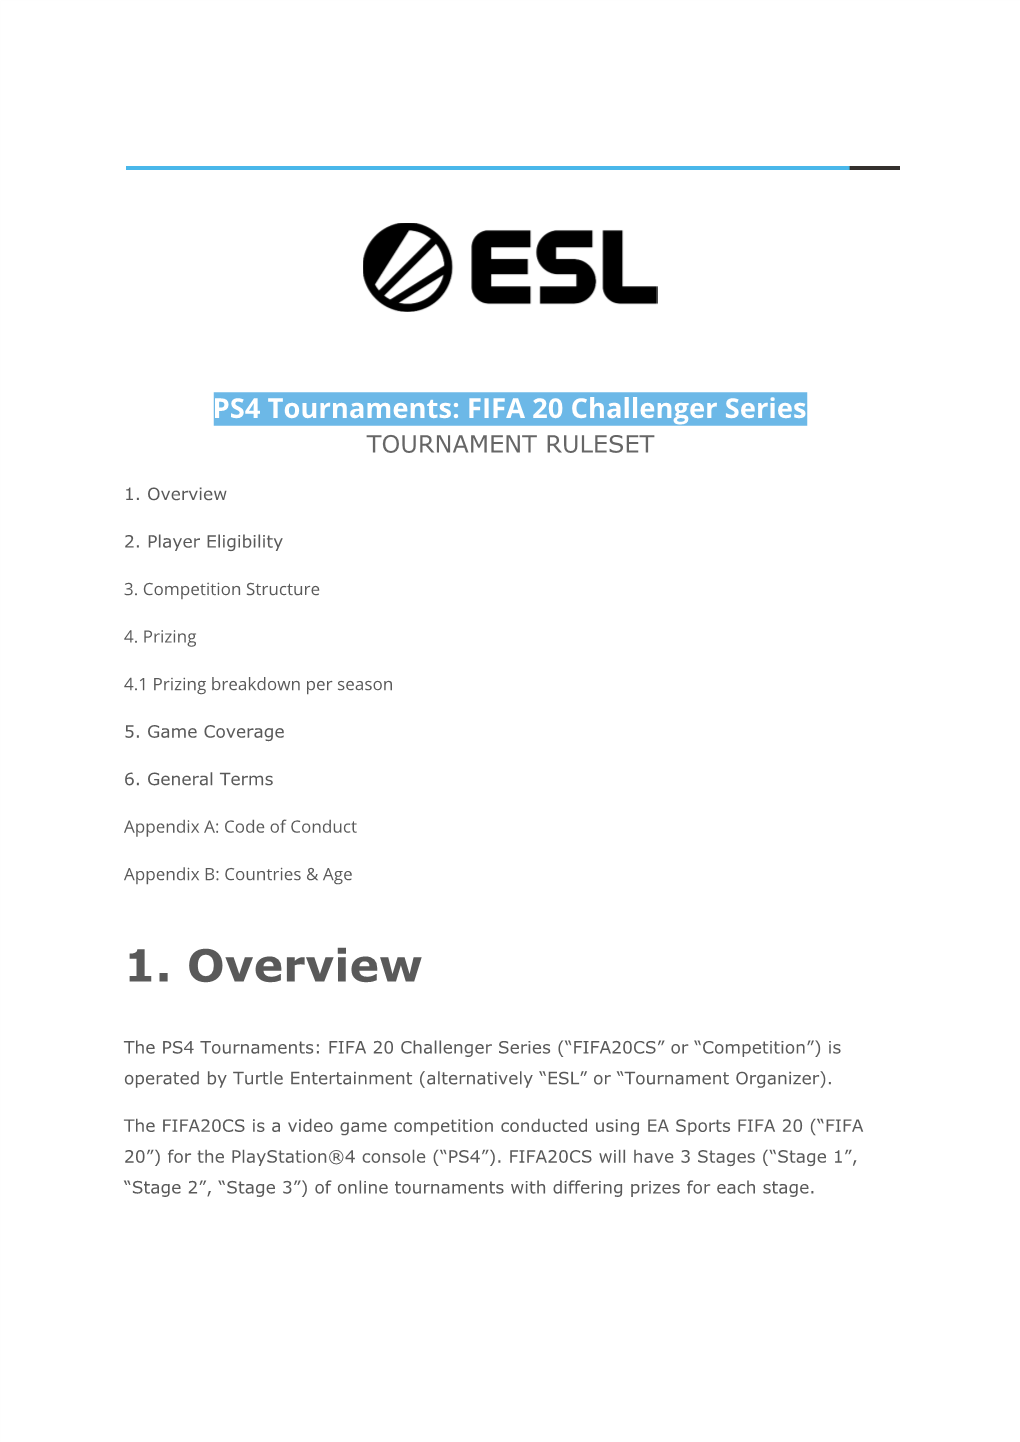 PS4 Tournaments: FIFA 20 Challenger Series TOURNAMENT RULESET